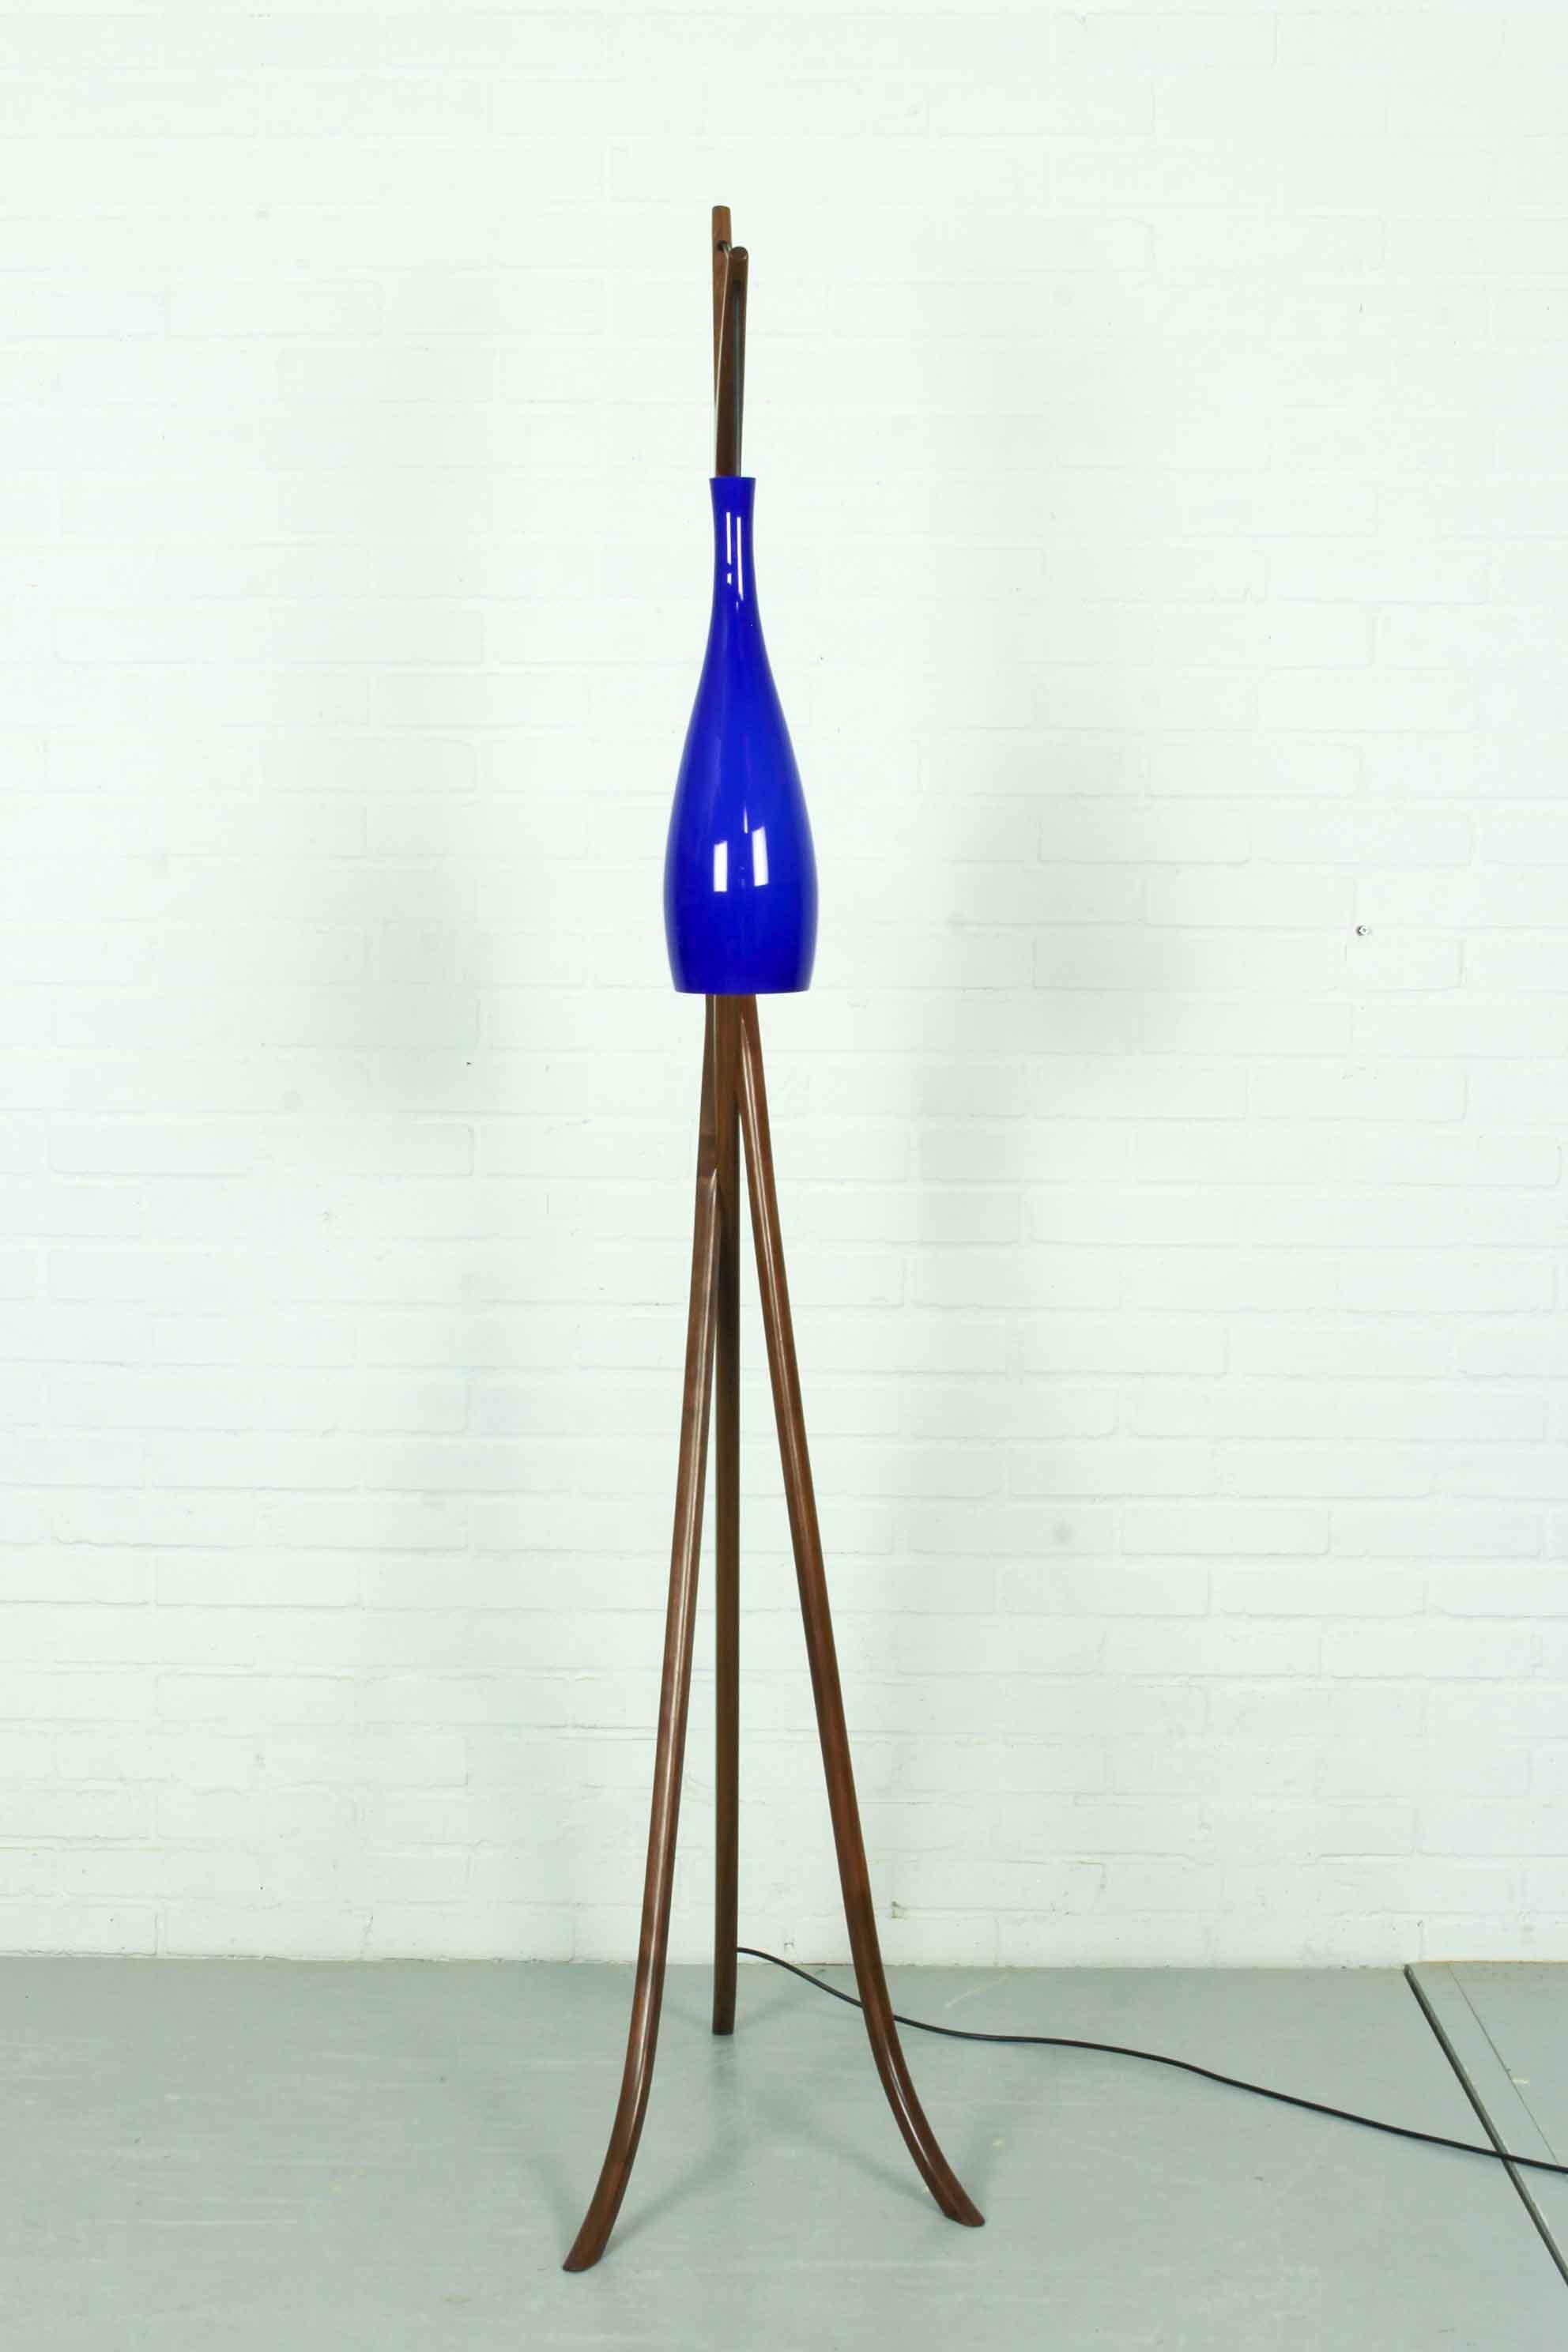 Contemporary Mid Century Pendant Light by Michael Bang for Fog & Morup A/S with Holmegaard For Sale